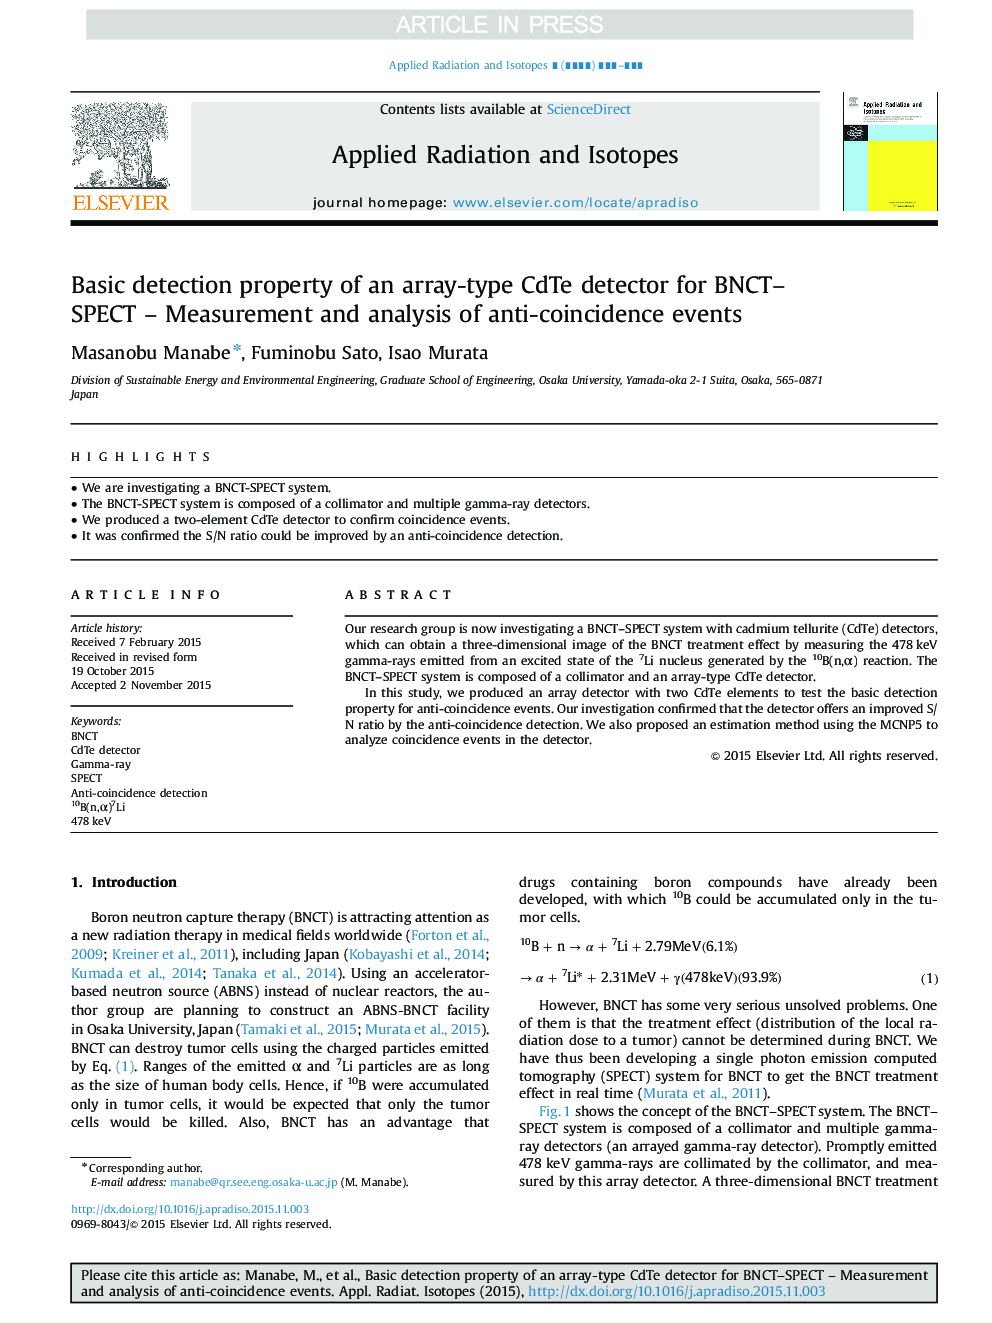 Basic detection property of an array-type CdTe detector for BNCT-SPECT - Measurement and analysis of anti-coincidence events